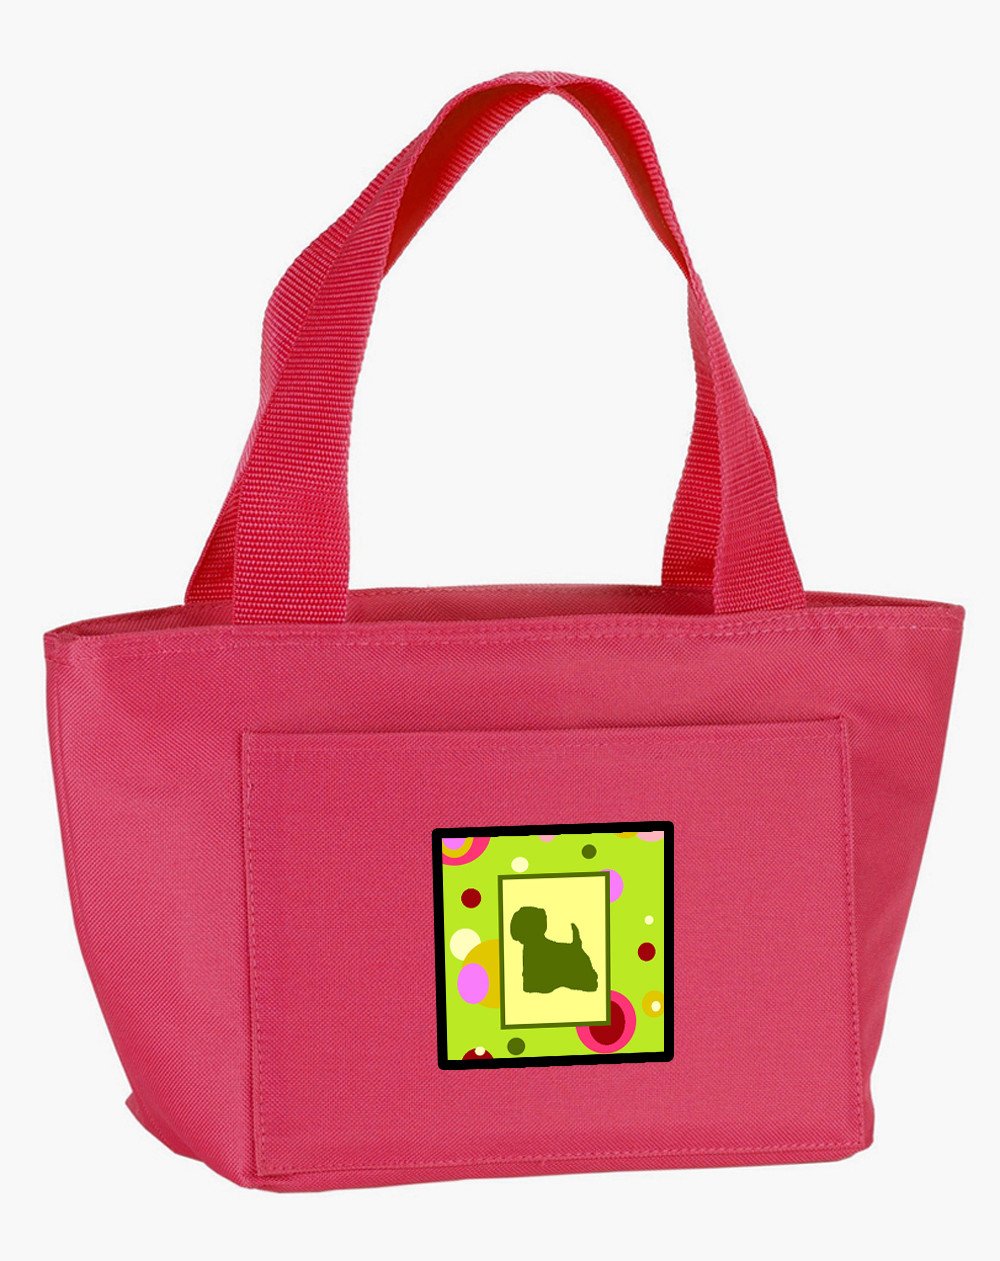 Lime Green Dots Westie Lunch Bag CK1065PK-8808 by Caroline's Treasures